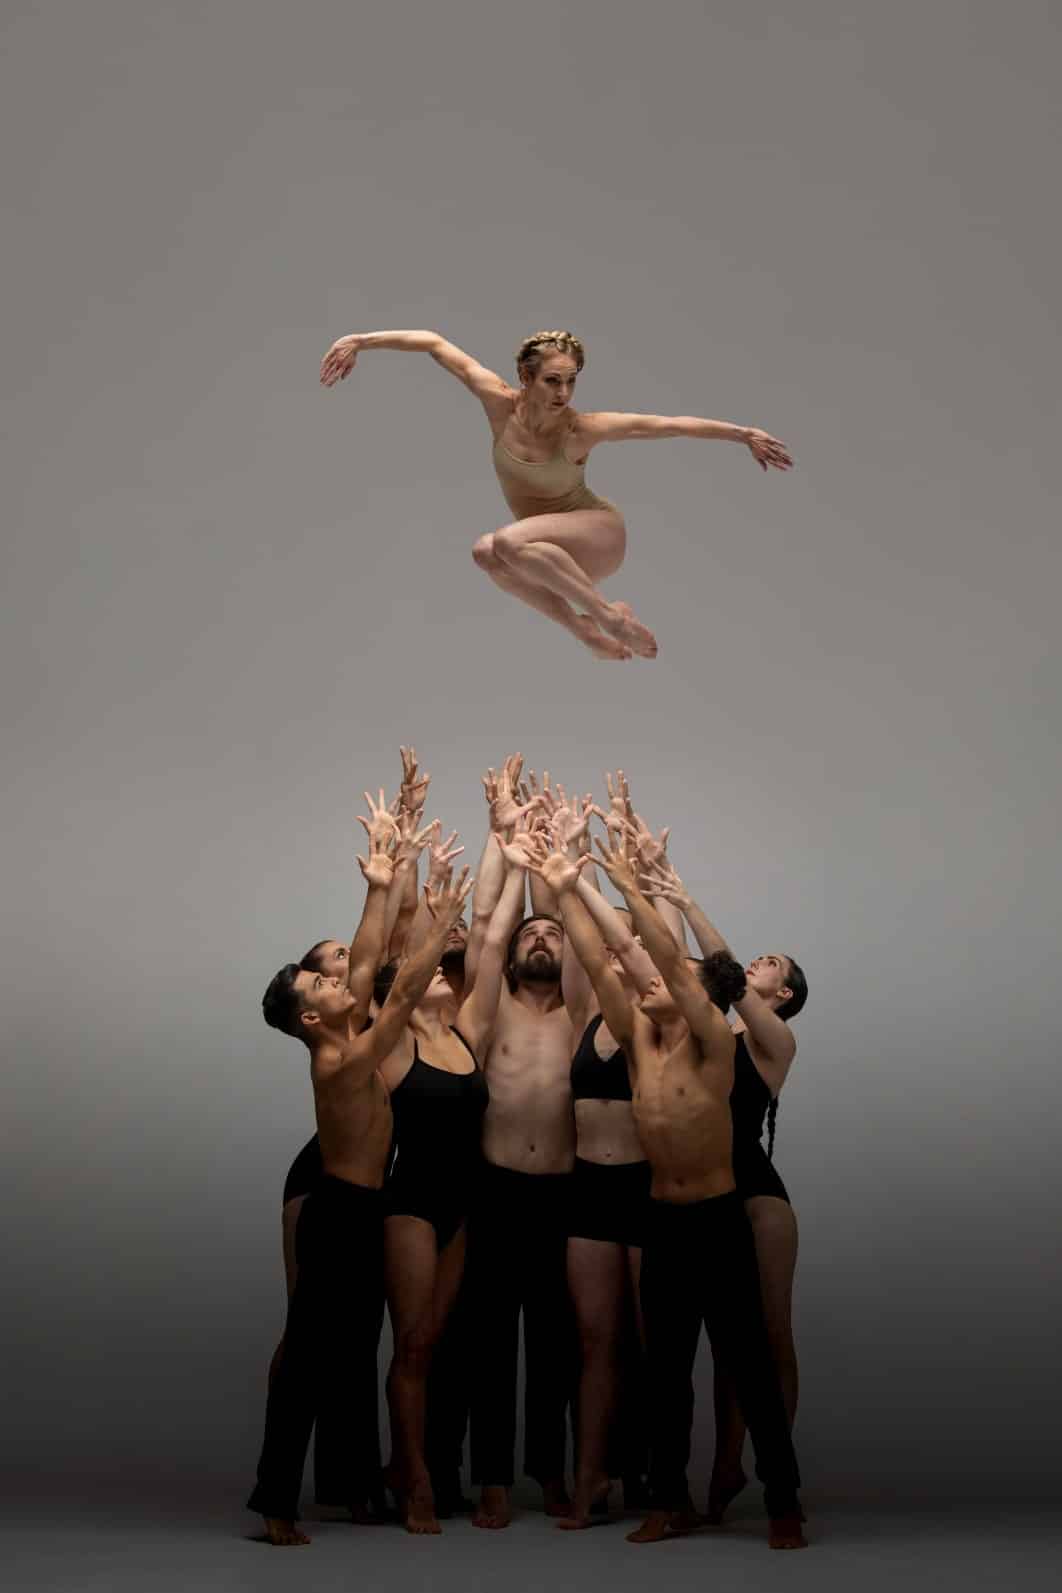 group of dancers throw up woman in air beautiful photo shoot by professional photographer in houston texas photo studio